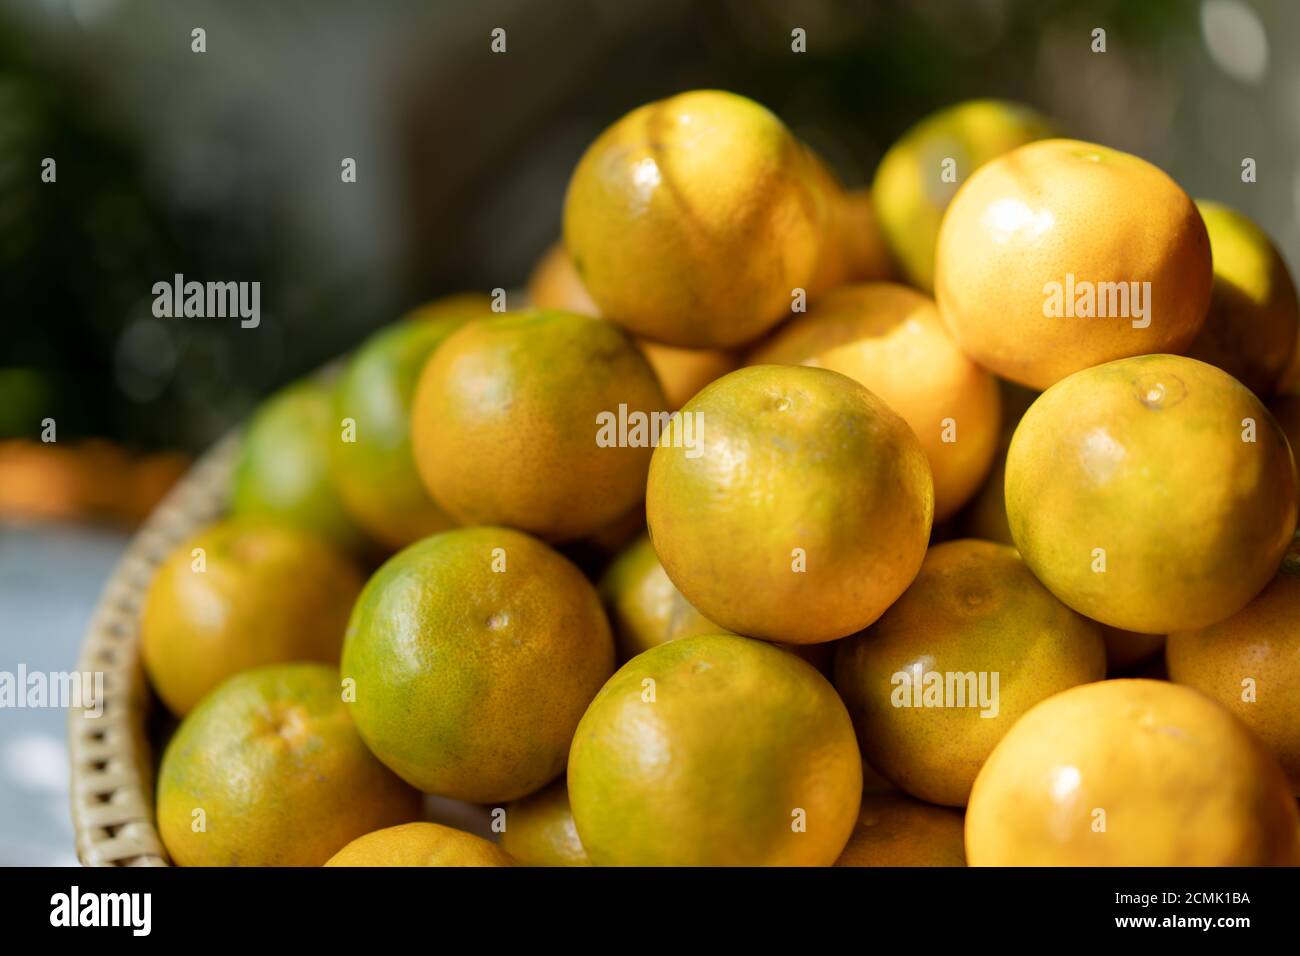 a pile of oranges, on a bamboo wicker plate in golden light on blur green nature background. Stock Photo